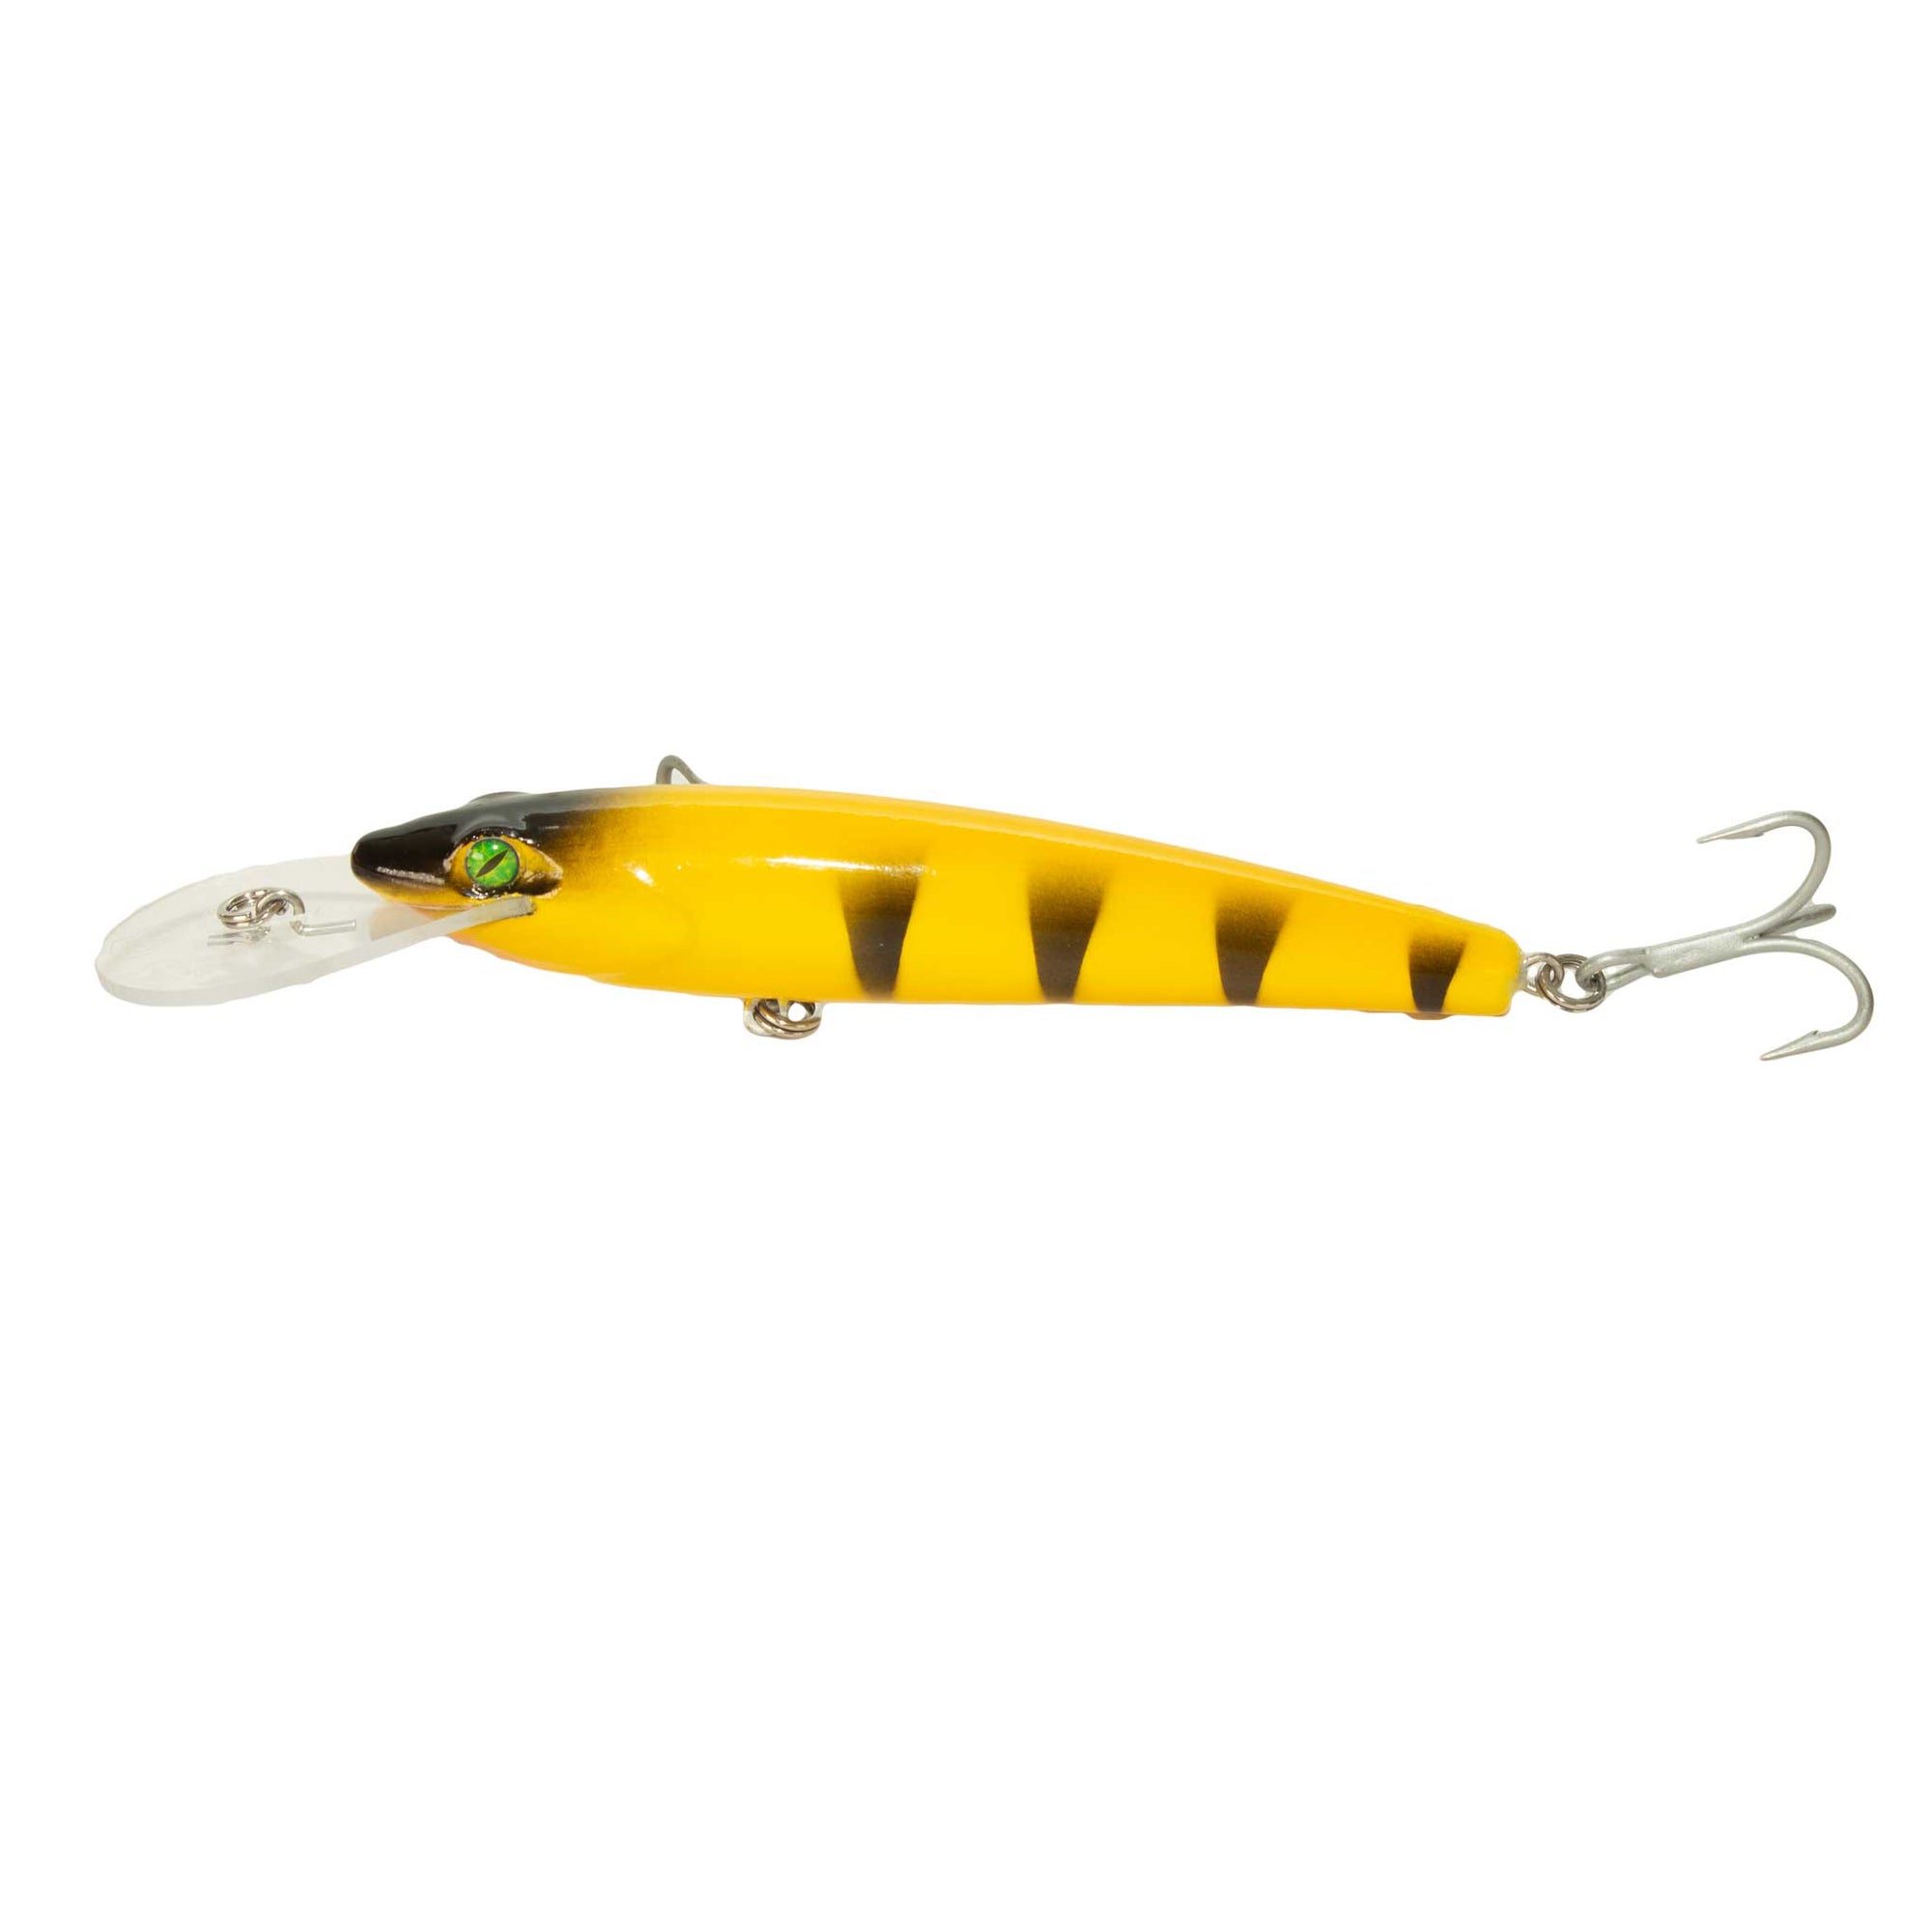 Mutt Deep - 90mm Handcrafted Timber Fishing Lure - Old Dog Lures